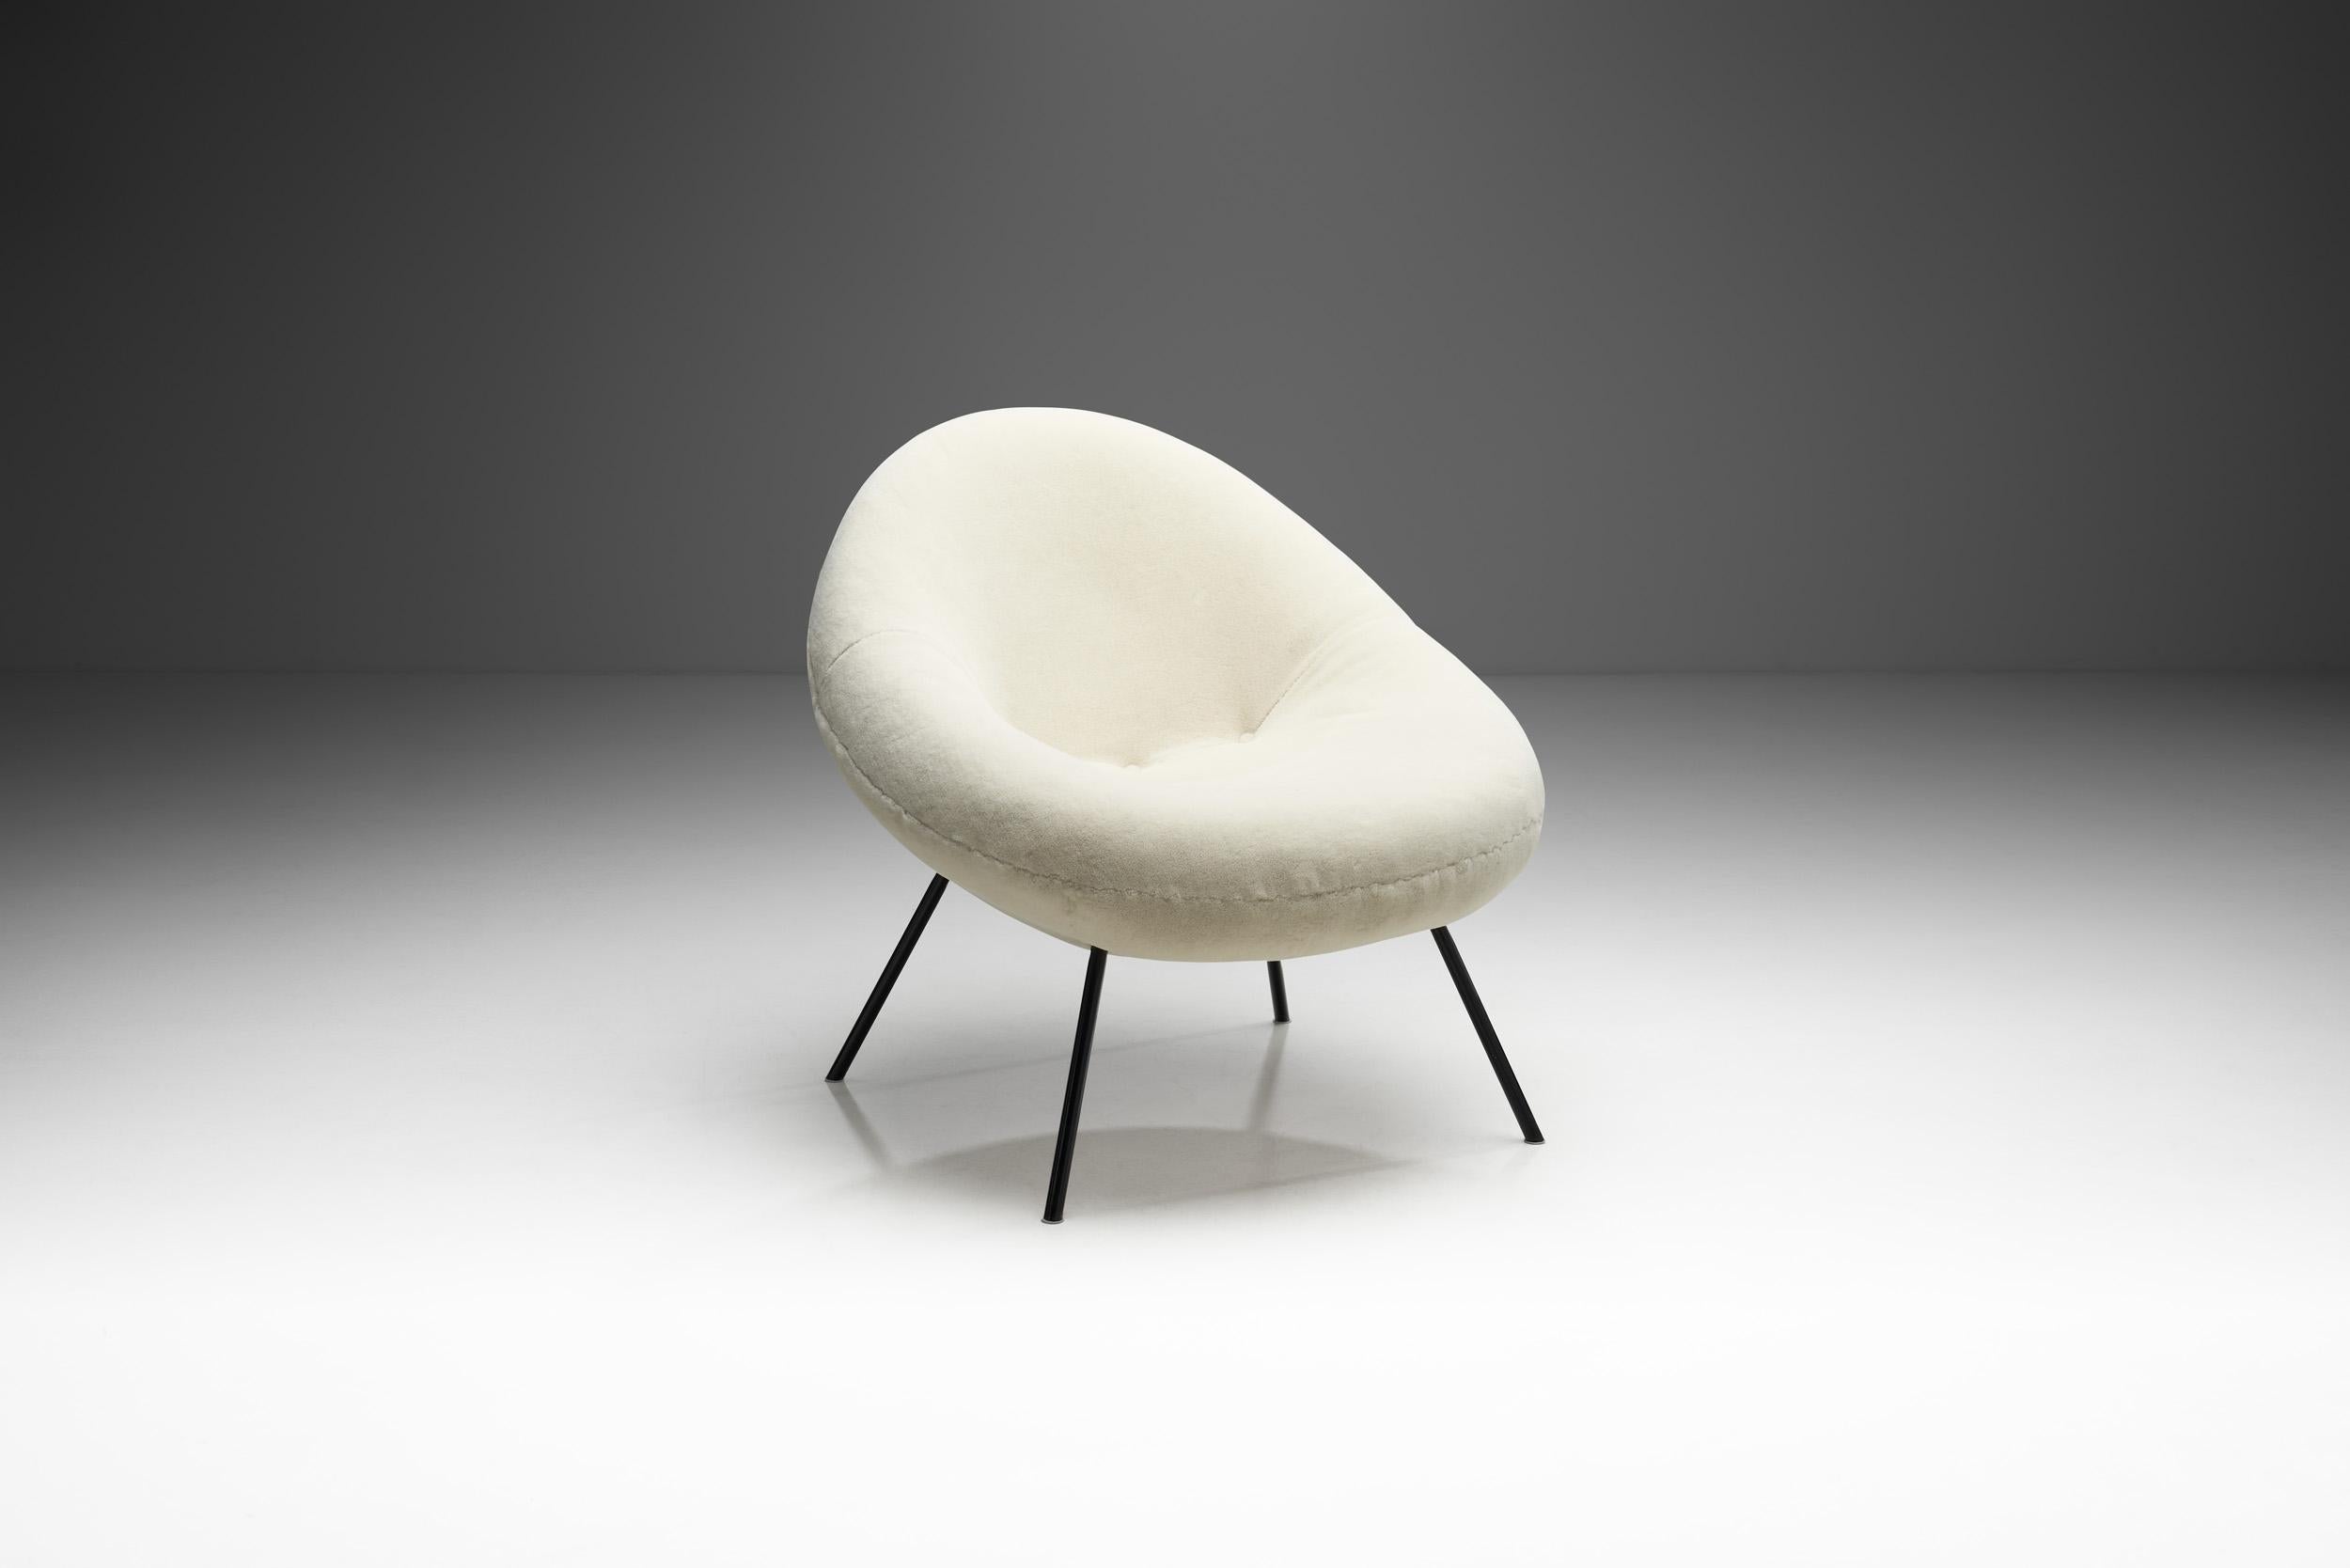 This rare and unique lounge chair or cocktail chair is - along with the Madame - Fritz Neth’s most sought after seating design.

The design language is entirely dedicated to the organic-modern style of the 1950s. Much like in Scandinavia, the